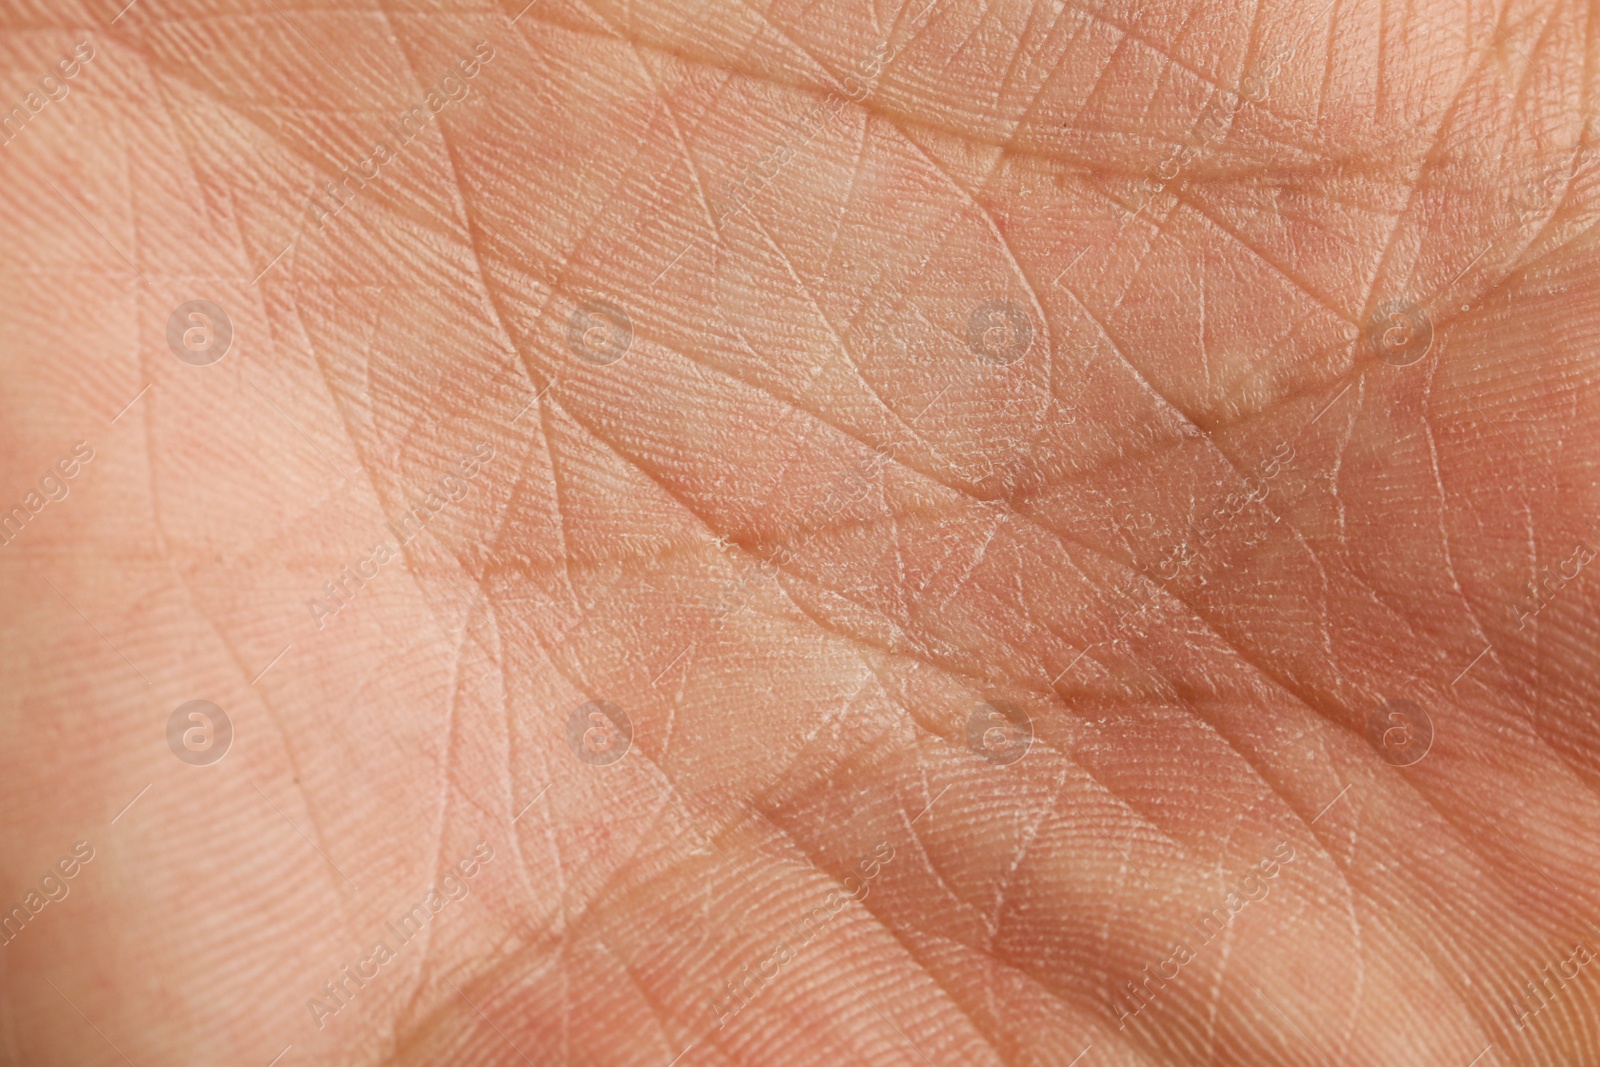 Photo of Closeup view of human palm with dry skin